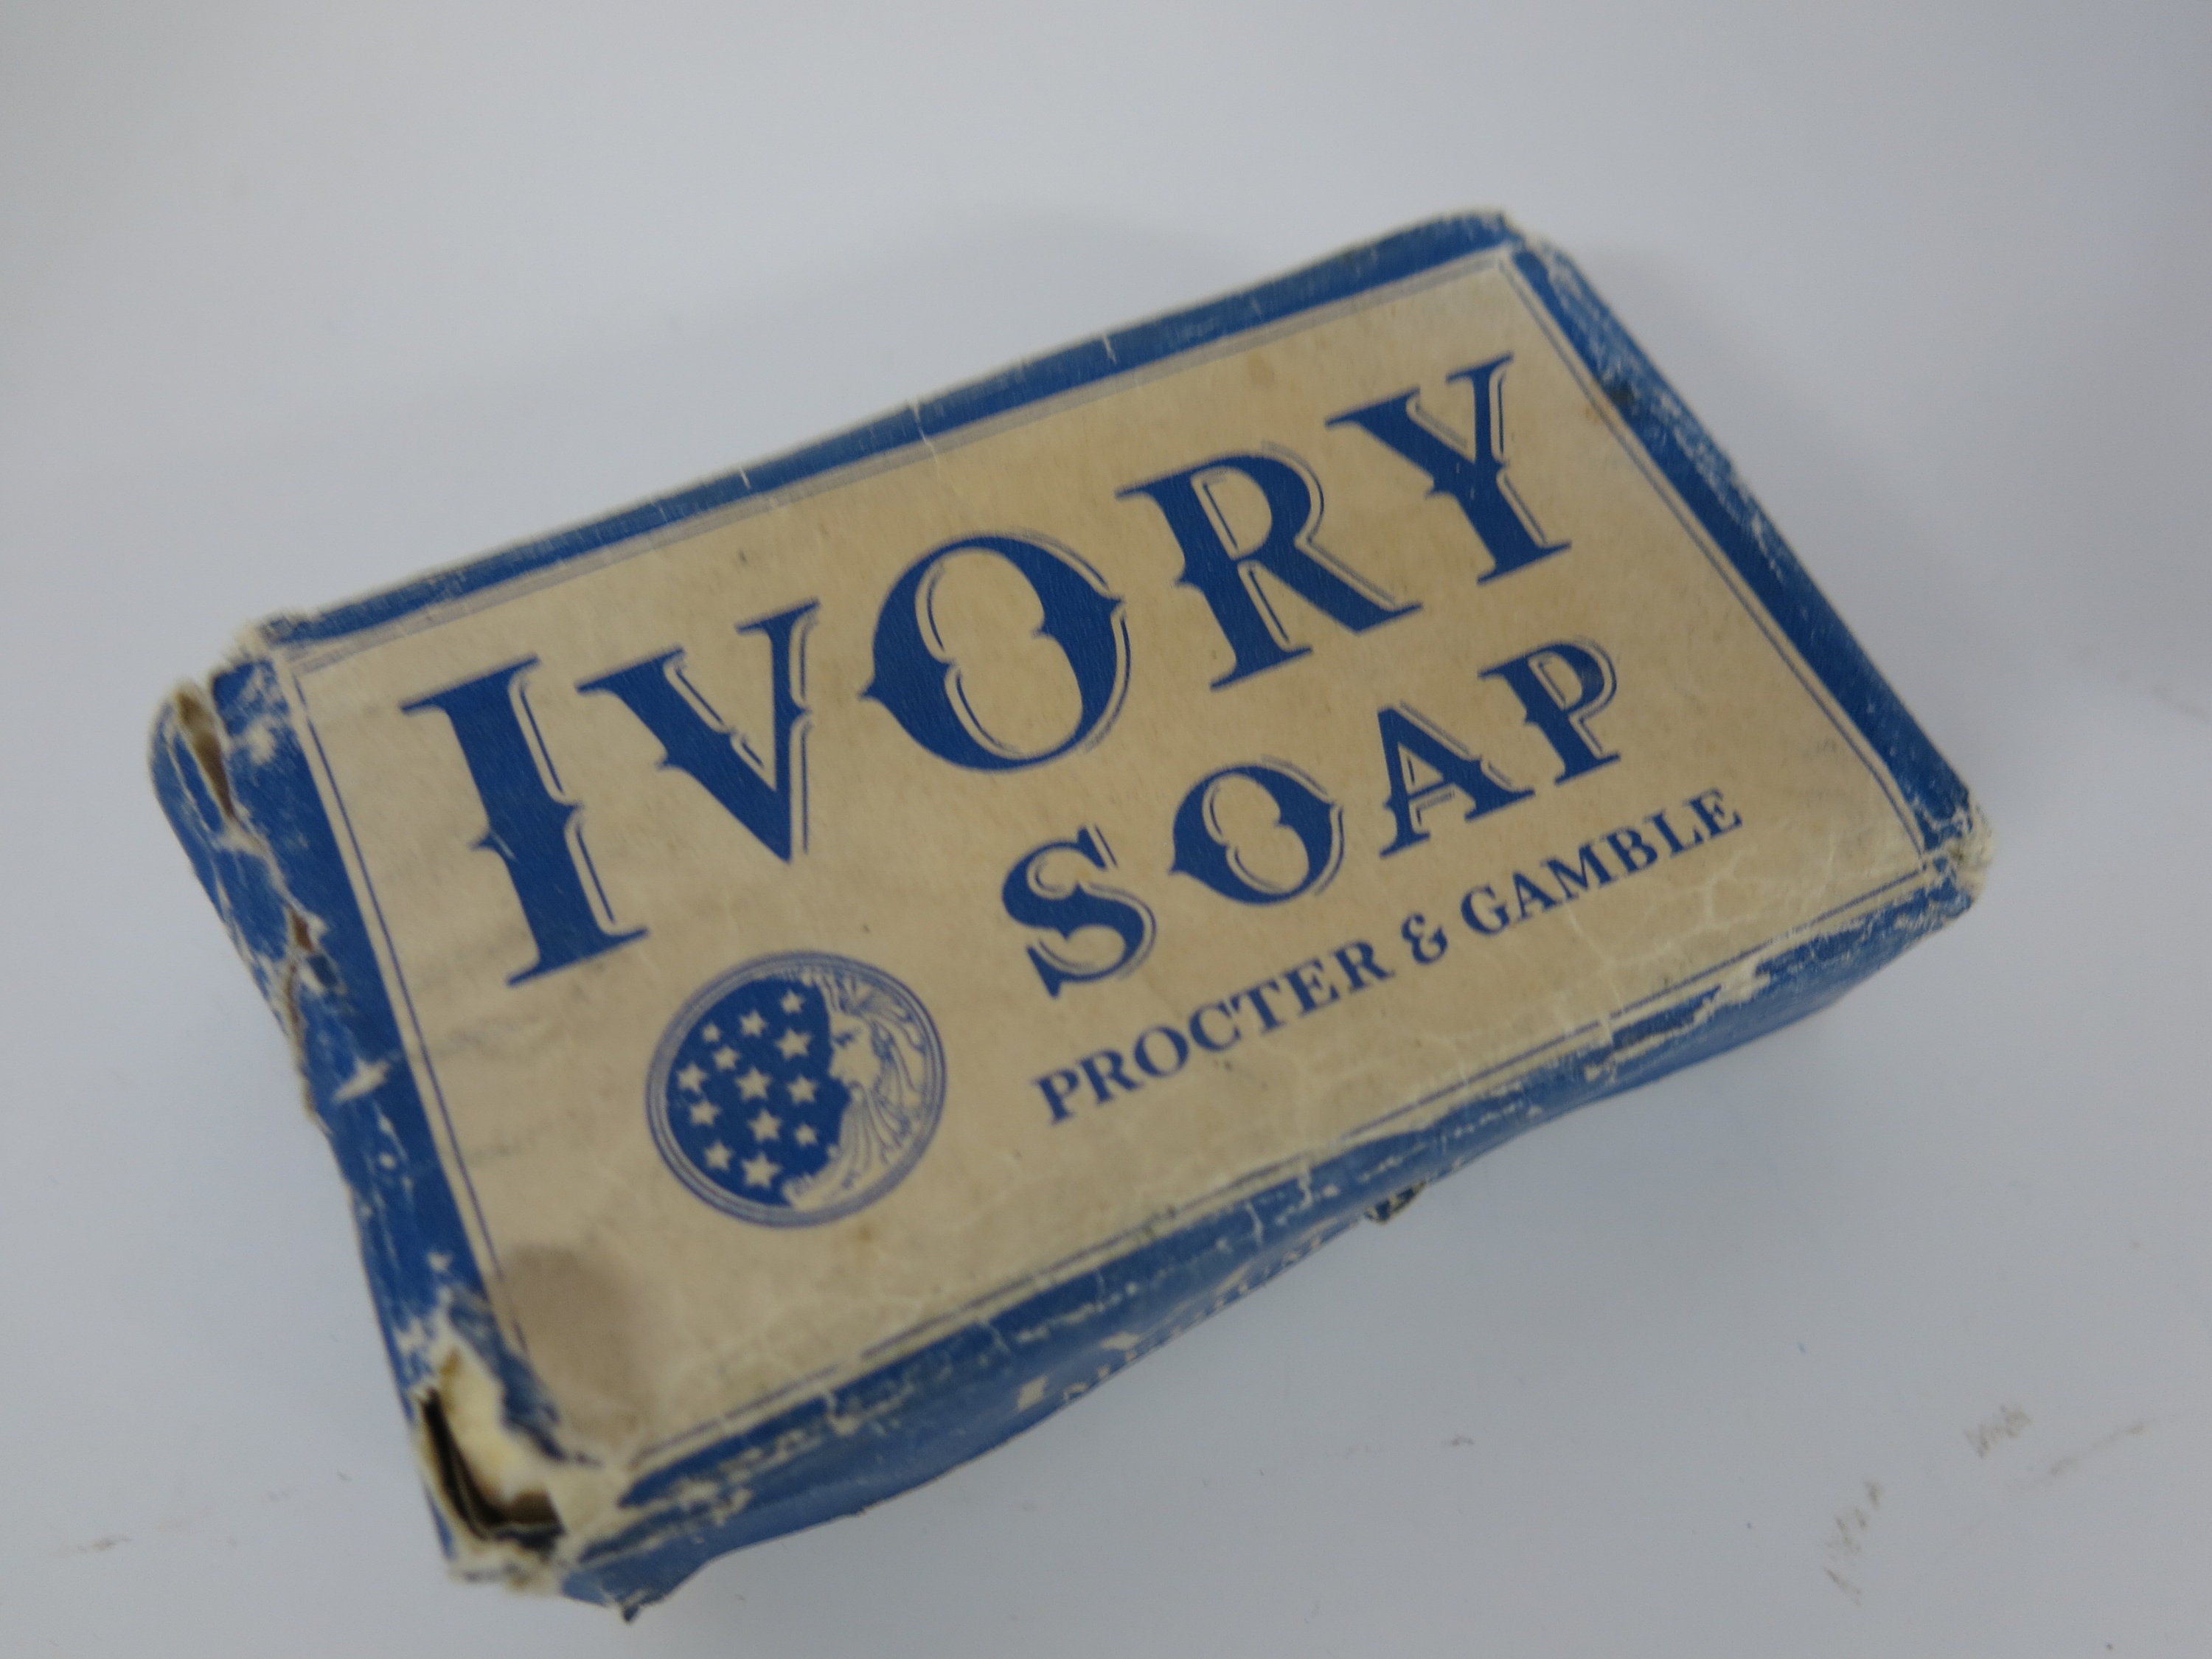 Vintage 40s Lava Soap Bar Procter & Gamble Made in USA Unused New